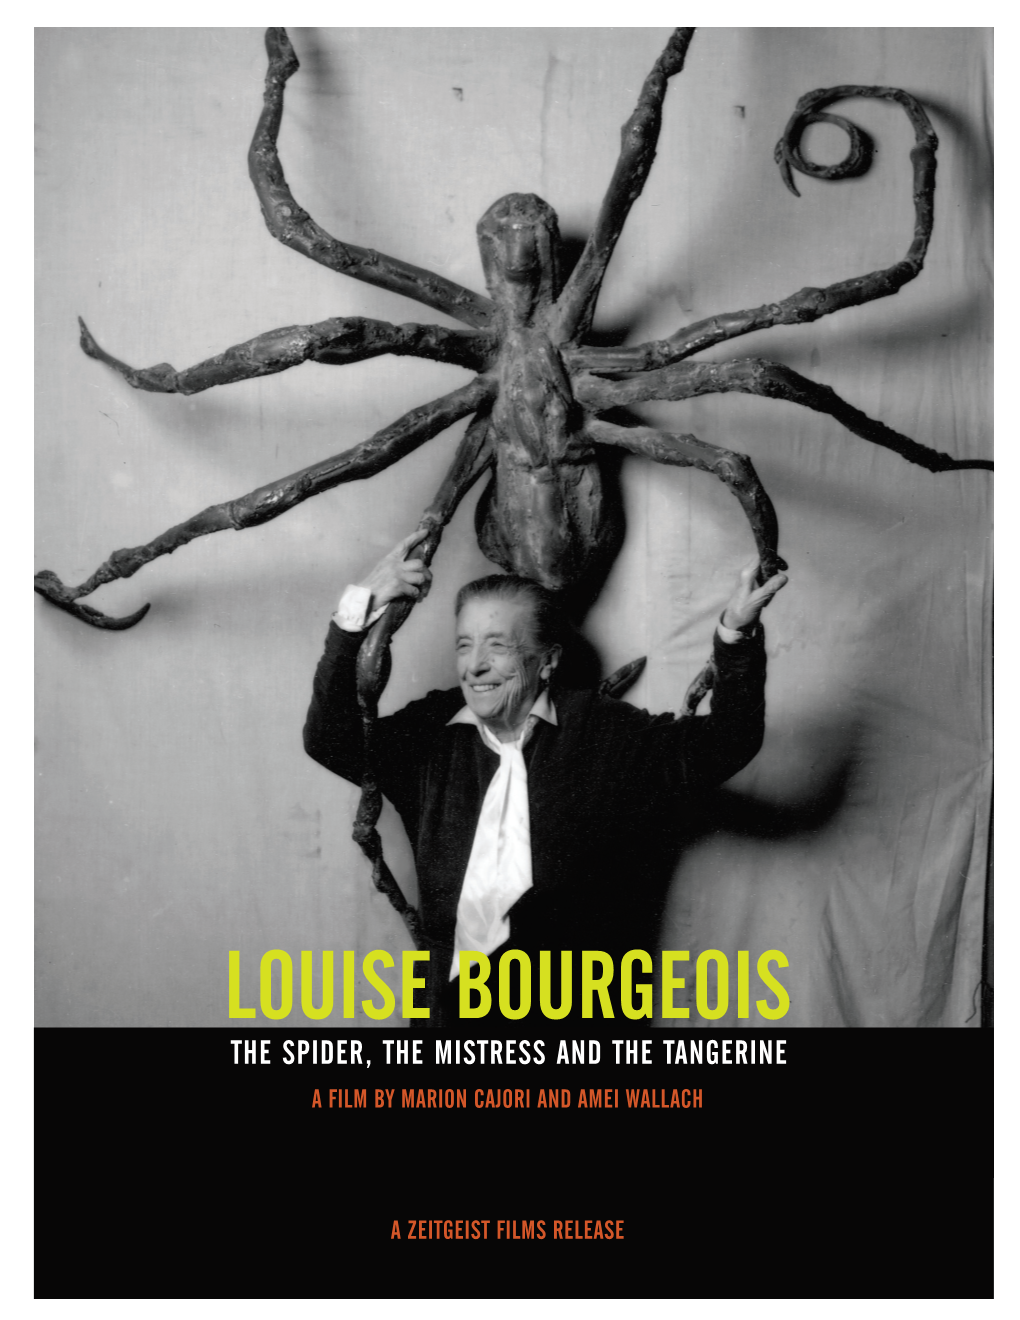 LOUISE BOURGEOIS the SPIDER, the MISTRESS and the Tangerine a FILM by MARION CAJORI and AMEI WALLACH